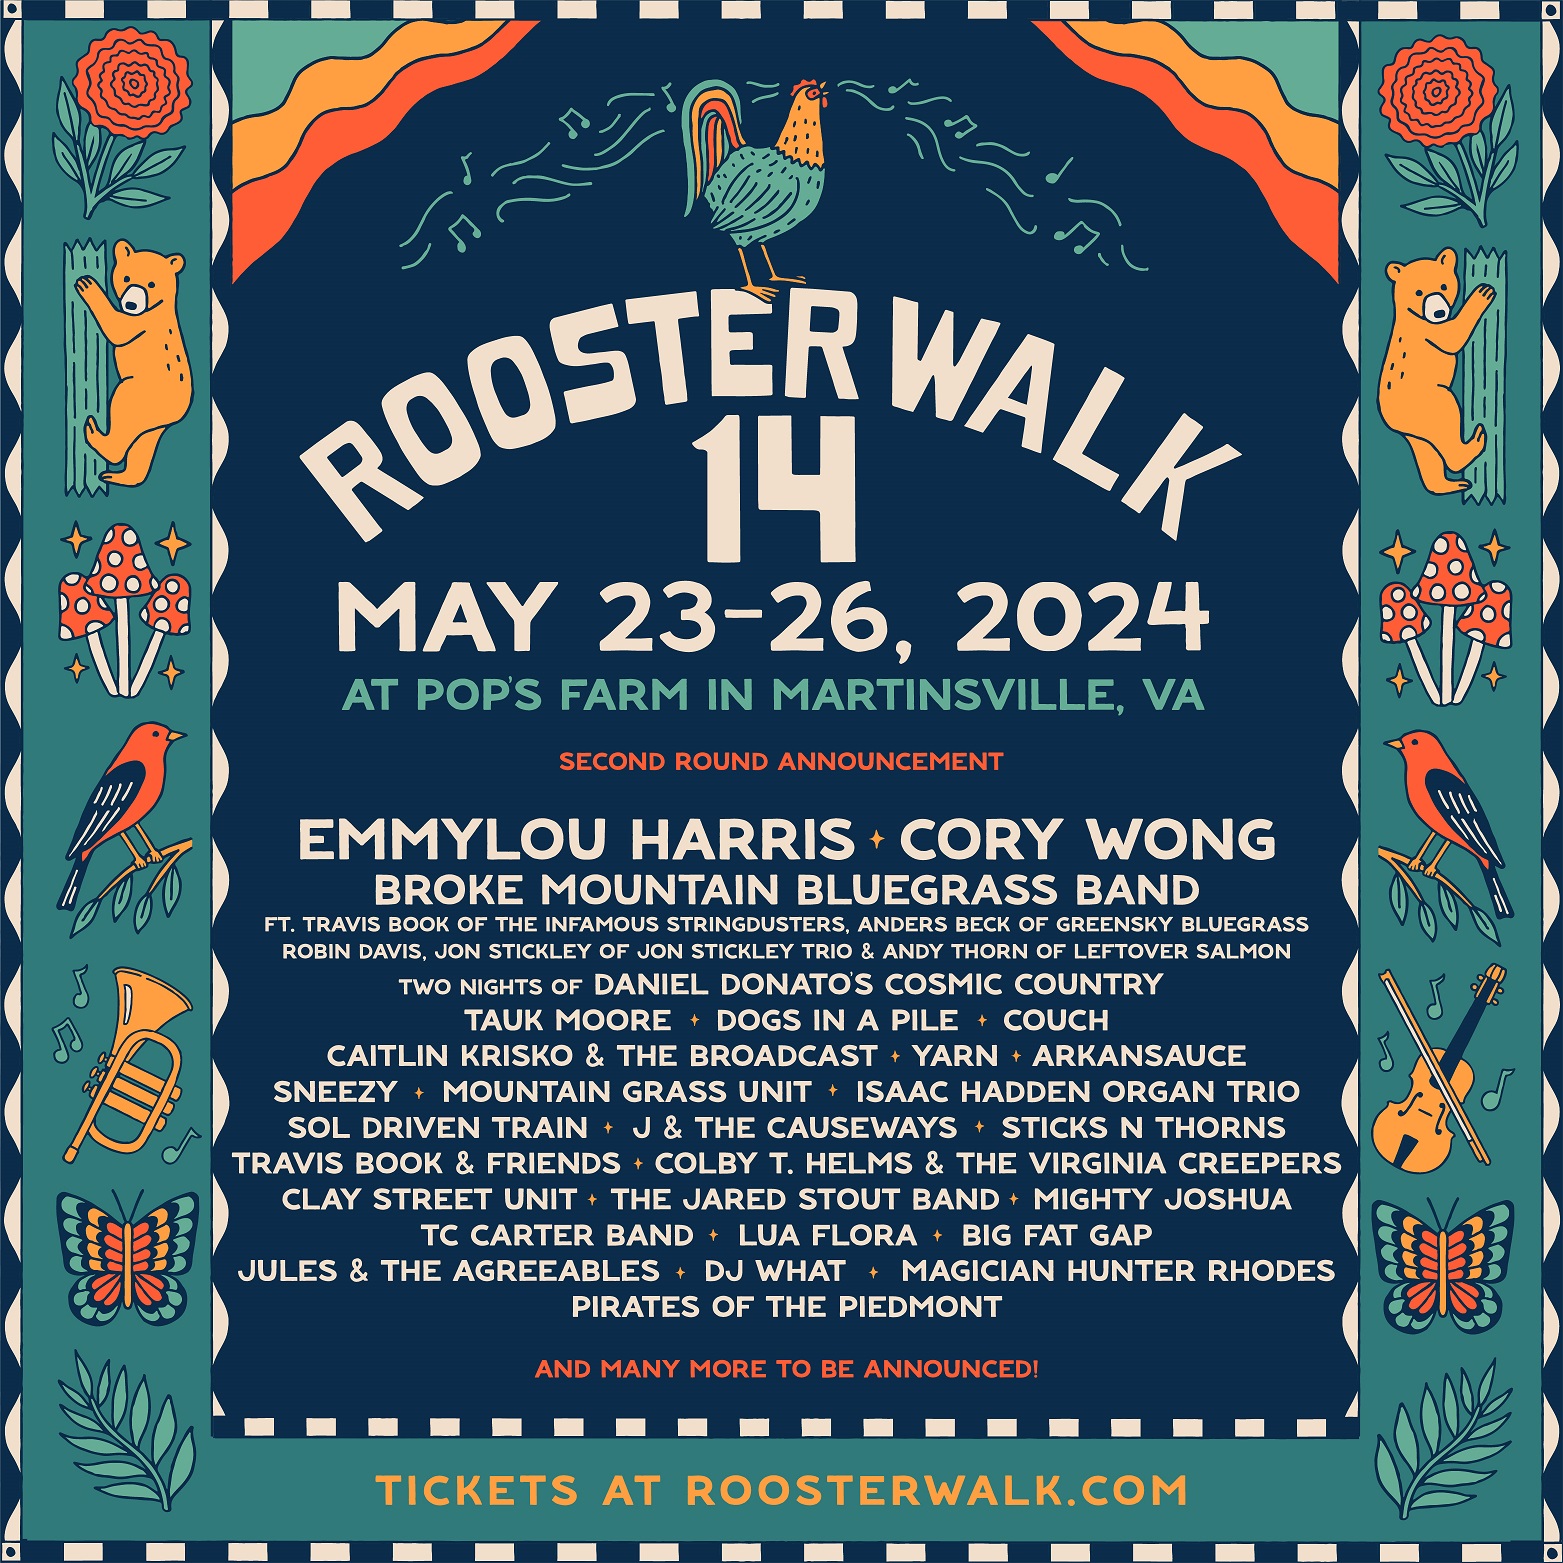 Music icon Emmylou Harris, rock/funk guitar wizard Cory Wong top Rooster Walk 14 band lineup